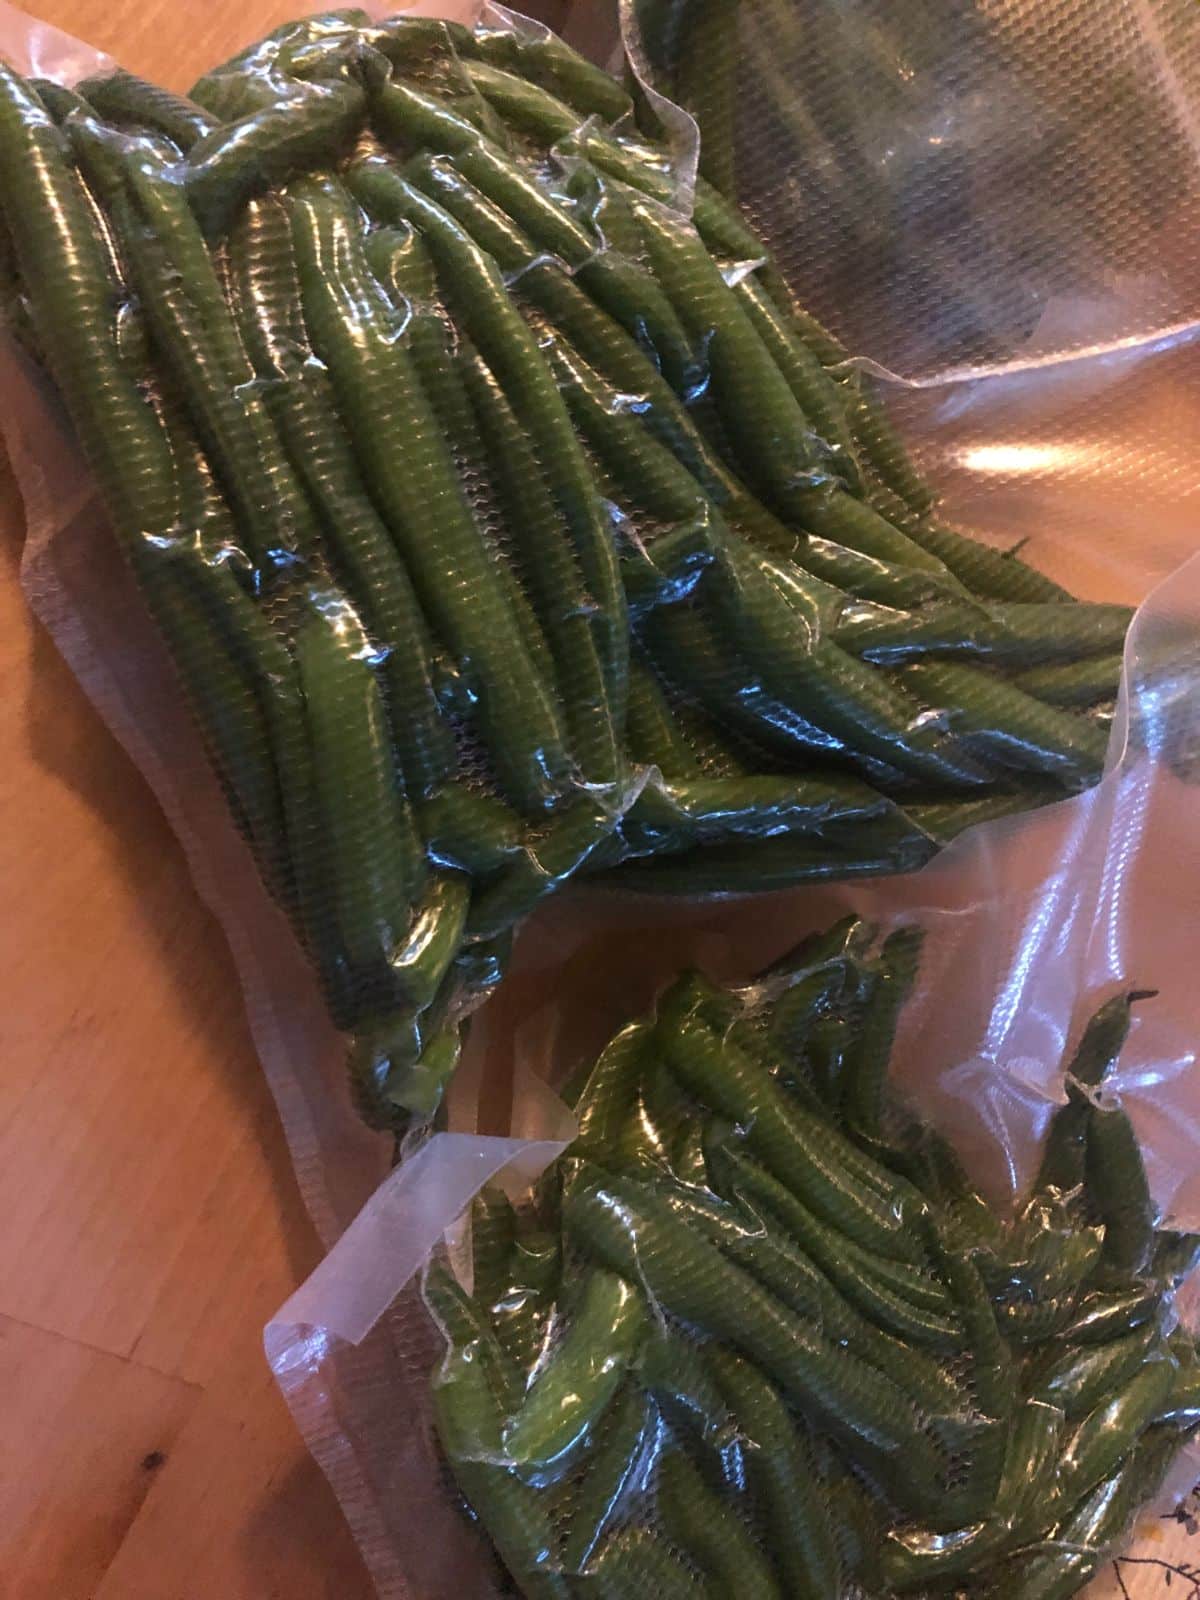 A couple packages of green beans ready to freeze